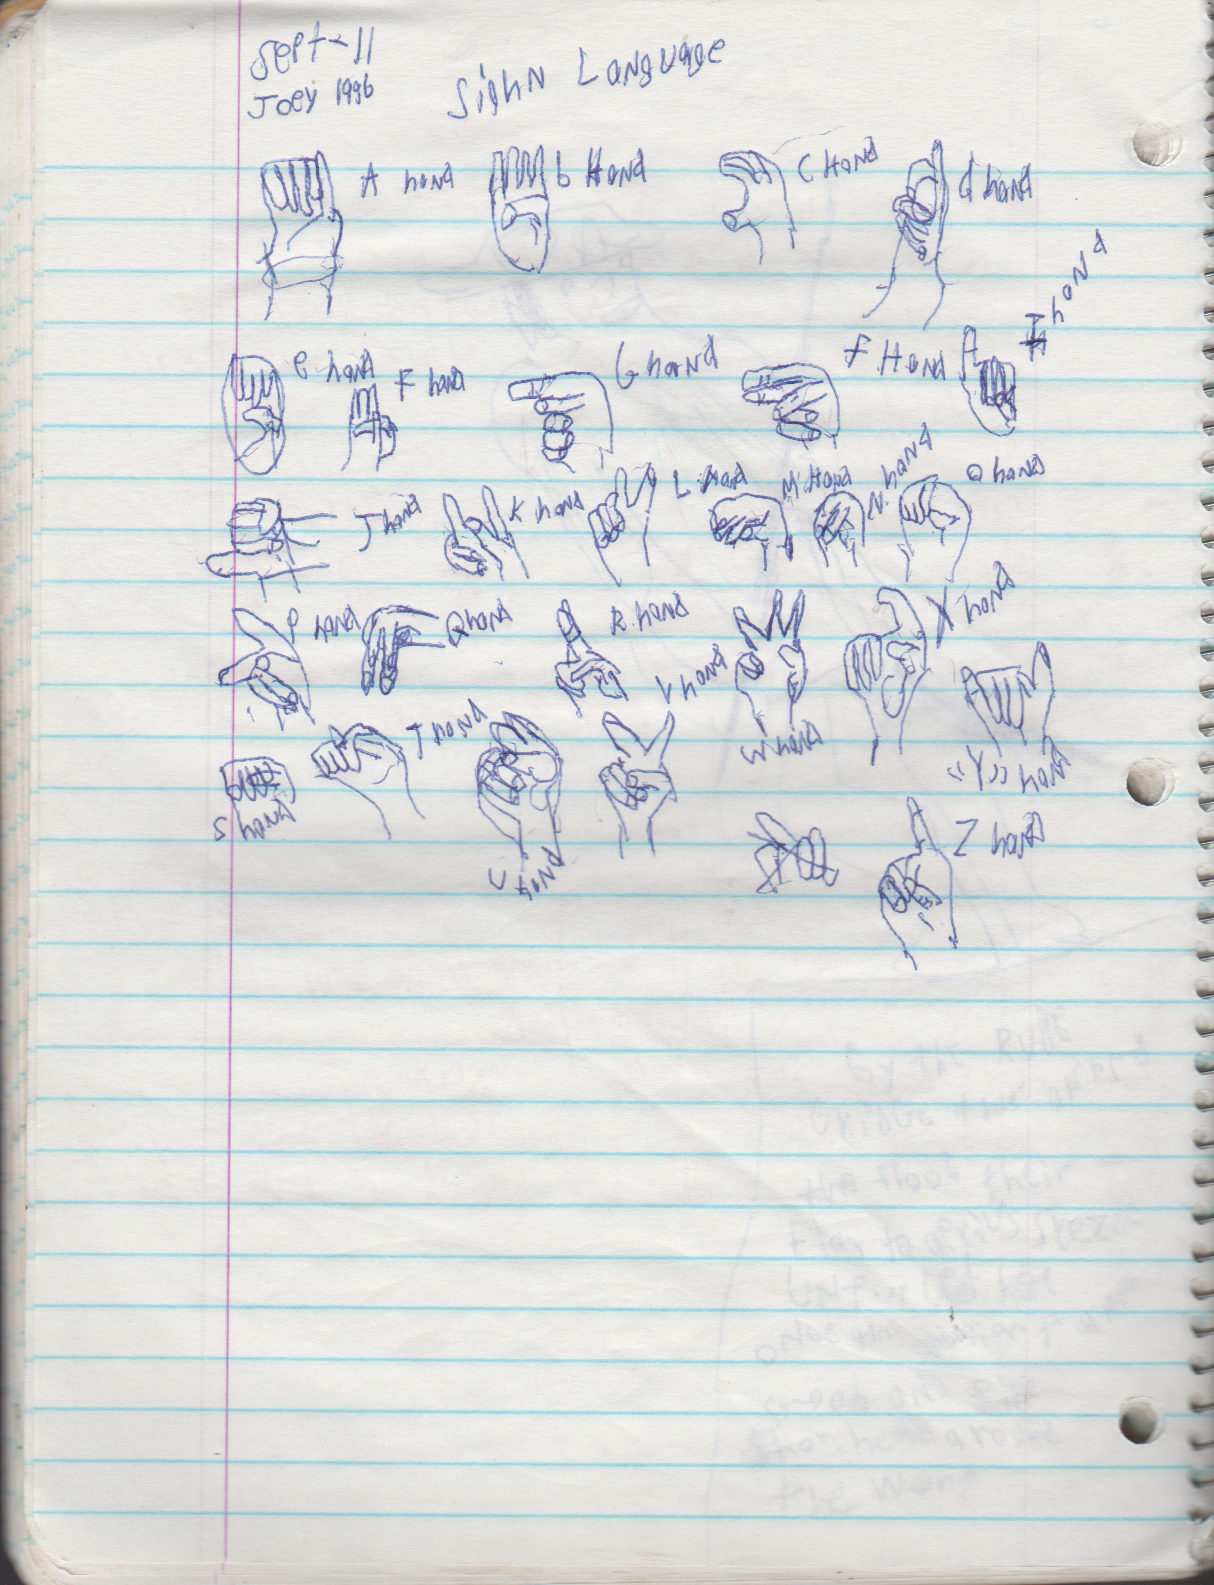 1996-08-18 - Saturday - 11 yr old Joey Arnold's School Book, dates through to 1998 apx, mostly 96, Writings, Drawings, Etc-050 ok.png